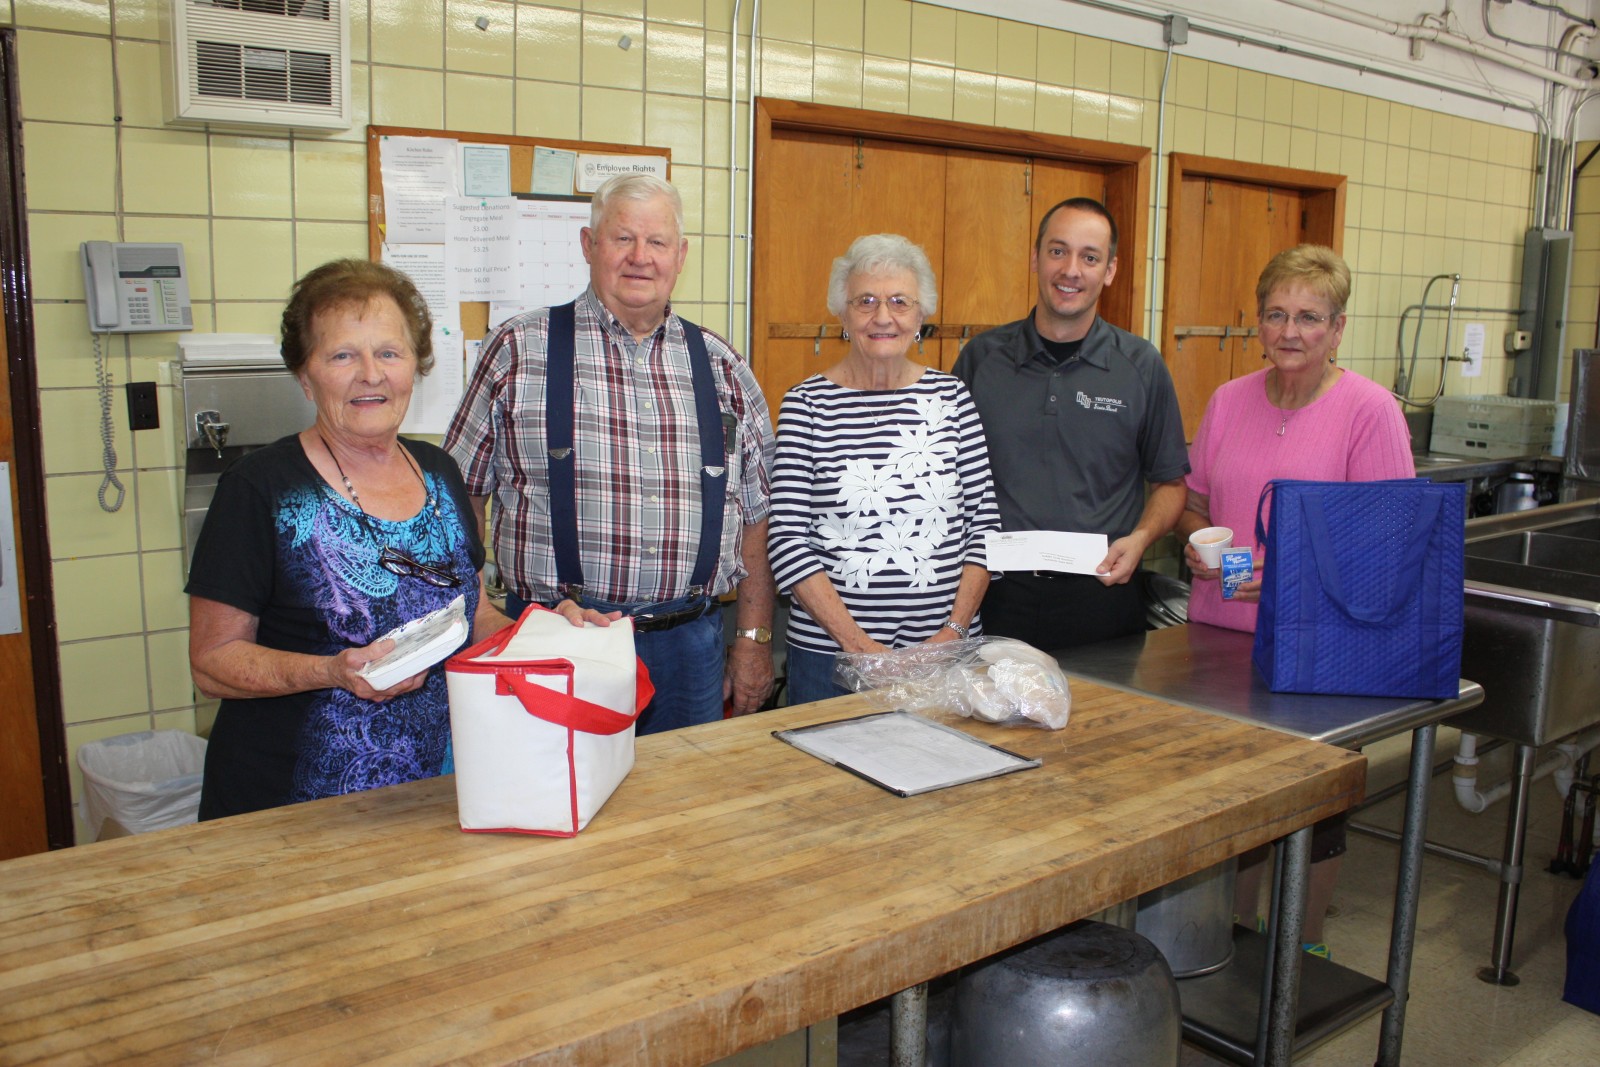 Representatives of the Teutopolis site of CEFS/Golden Circle Nutrition Program recently accepted a grant from Teutopolis State Bank. Pictured (L-R): Mable Harris, George Westendorf, Jeanette Westendorf, Jerry Runde (Teutopolis State Bank representative), and Nancy Hoene.